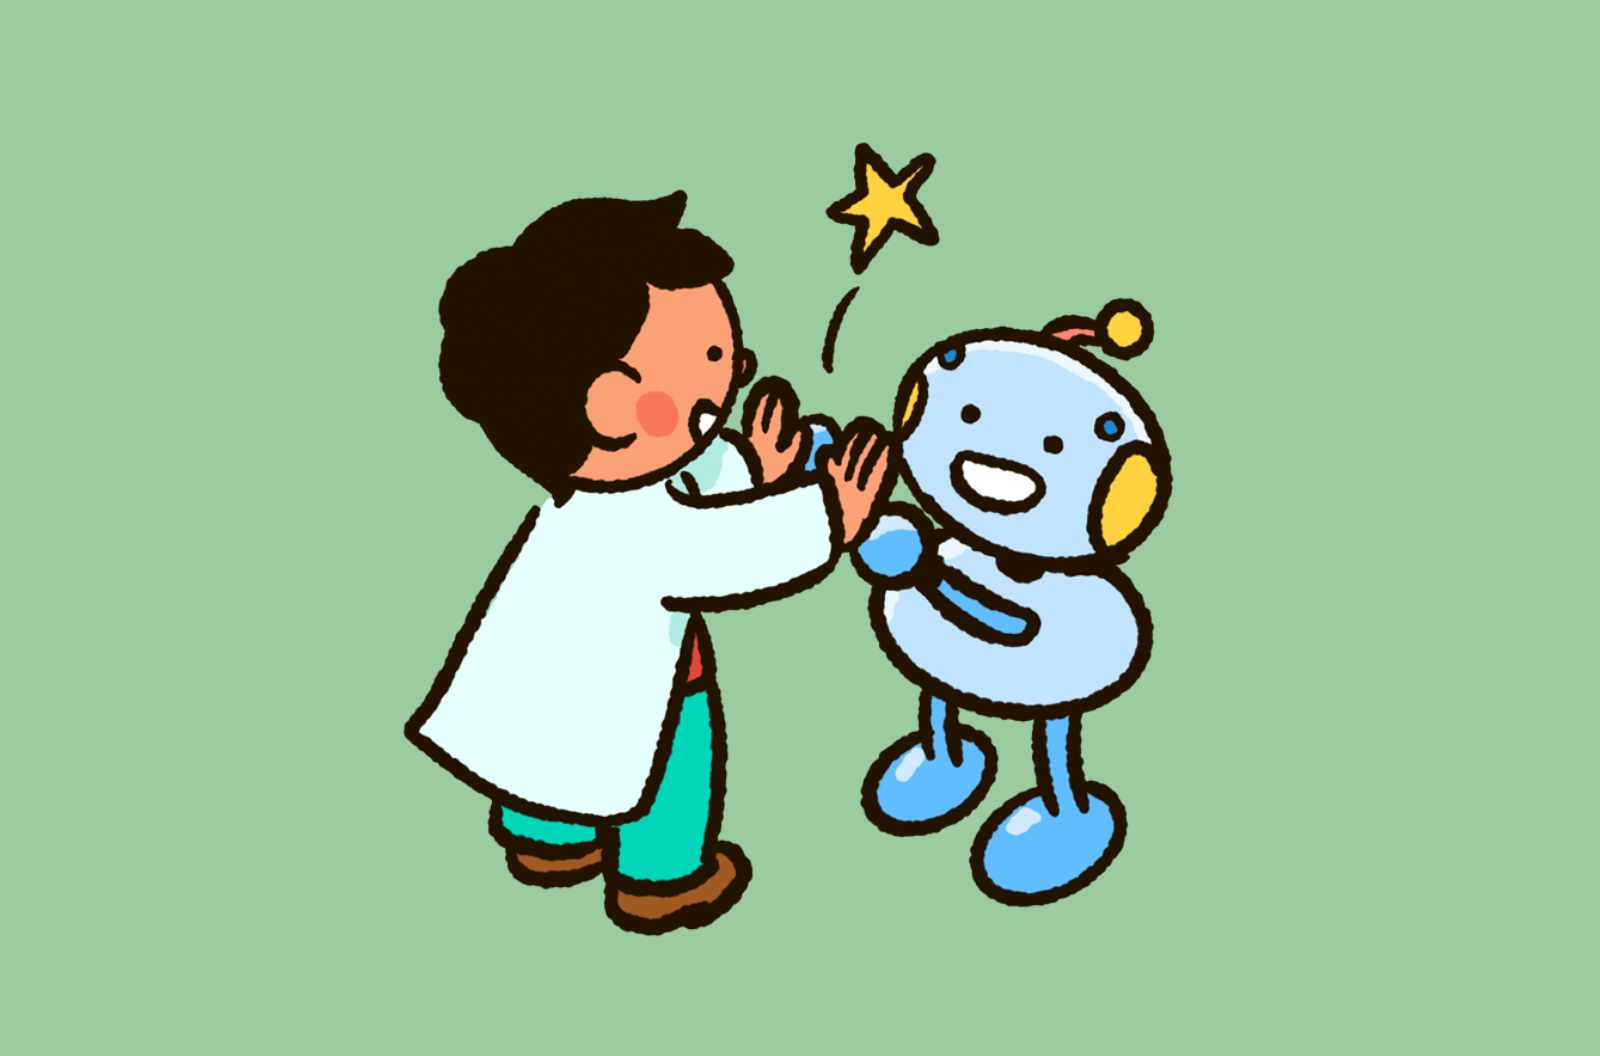 A young scientist and a robot smile as they give each other a high five.